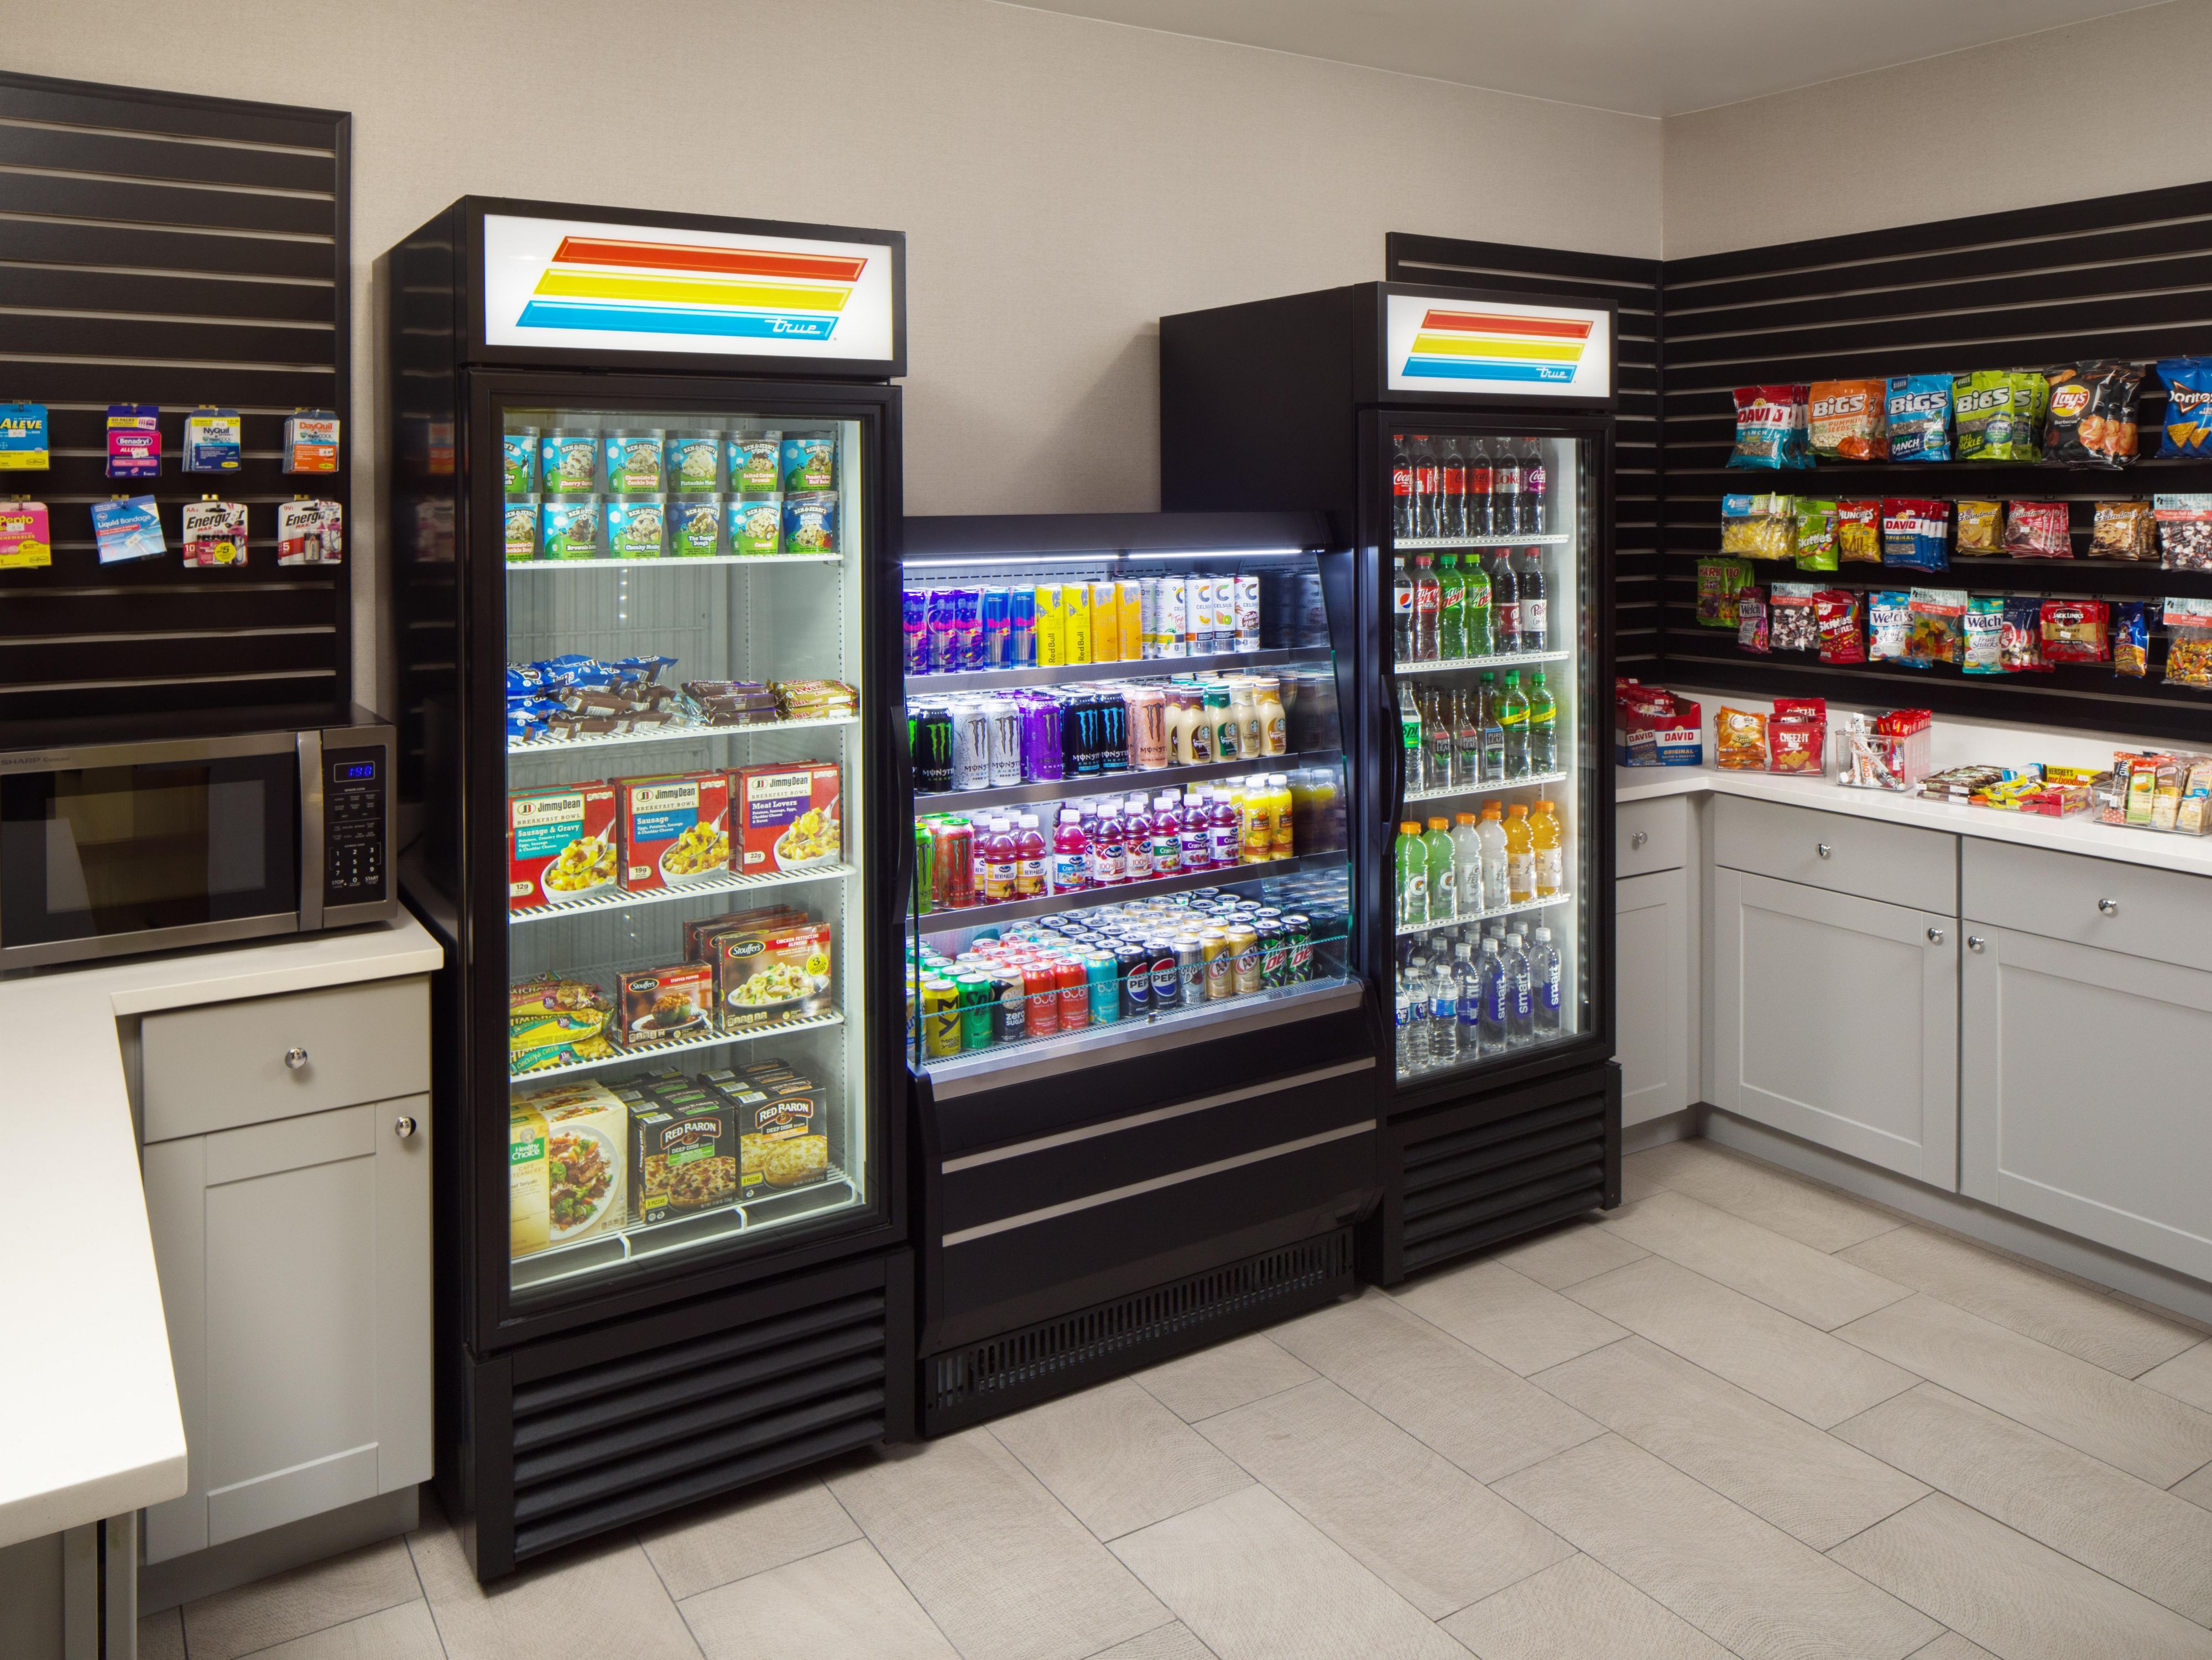 Our market offers a wide variety of delicious snacks, refreshing beverages, and convenience items to meet your needs.
Conveniently located in the lobby, the market is easily accessible for guests, ensuring you can quickly grab what you need without any hassle. Whether you're staying at the hotel or passing by, stop by for a snack or cold drink. 